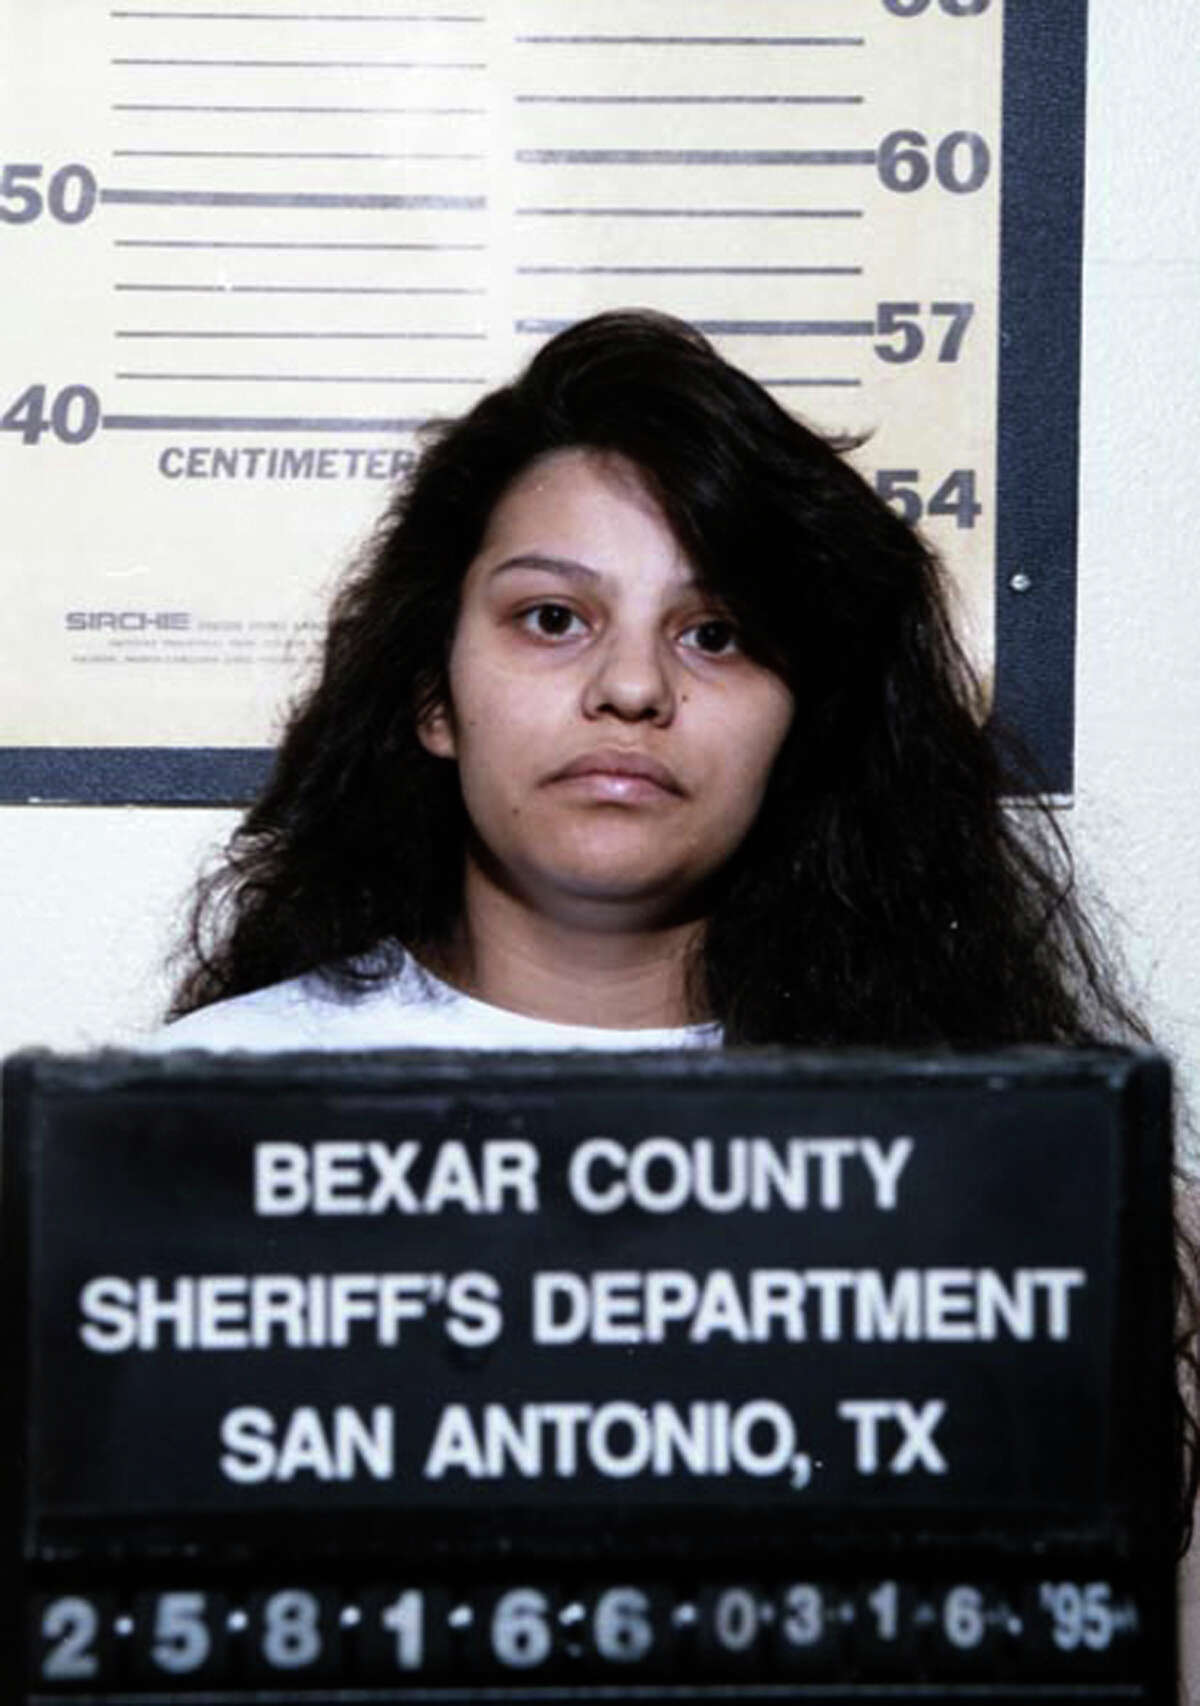 Wrongful Death ,Photo of Elizabeth Ramirez..... Elizabeth Ramirez, her roommate Kristie Mayhugh, and their two friends, Anna Vasquez and Cassandra Rivera, were accused in Sept. 1994 of sexually assaulting Elizabeth's two nieces, when the two girls visited Elizabeth's apartment at the end of July that same year. The four women were arrested after a grand jury indicted them 3/15/95 on two counts each of aggravated sexual assault of a child and two counts of indecency with a child.